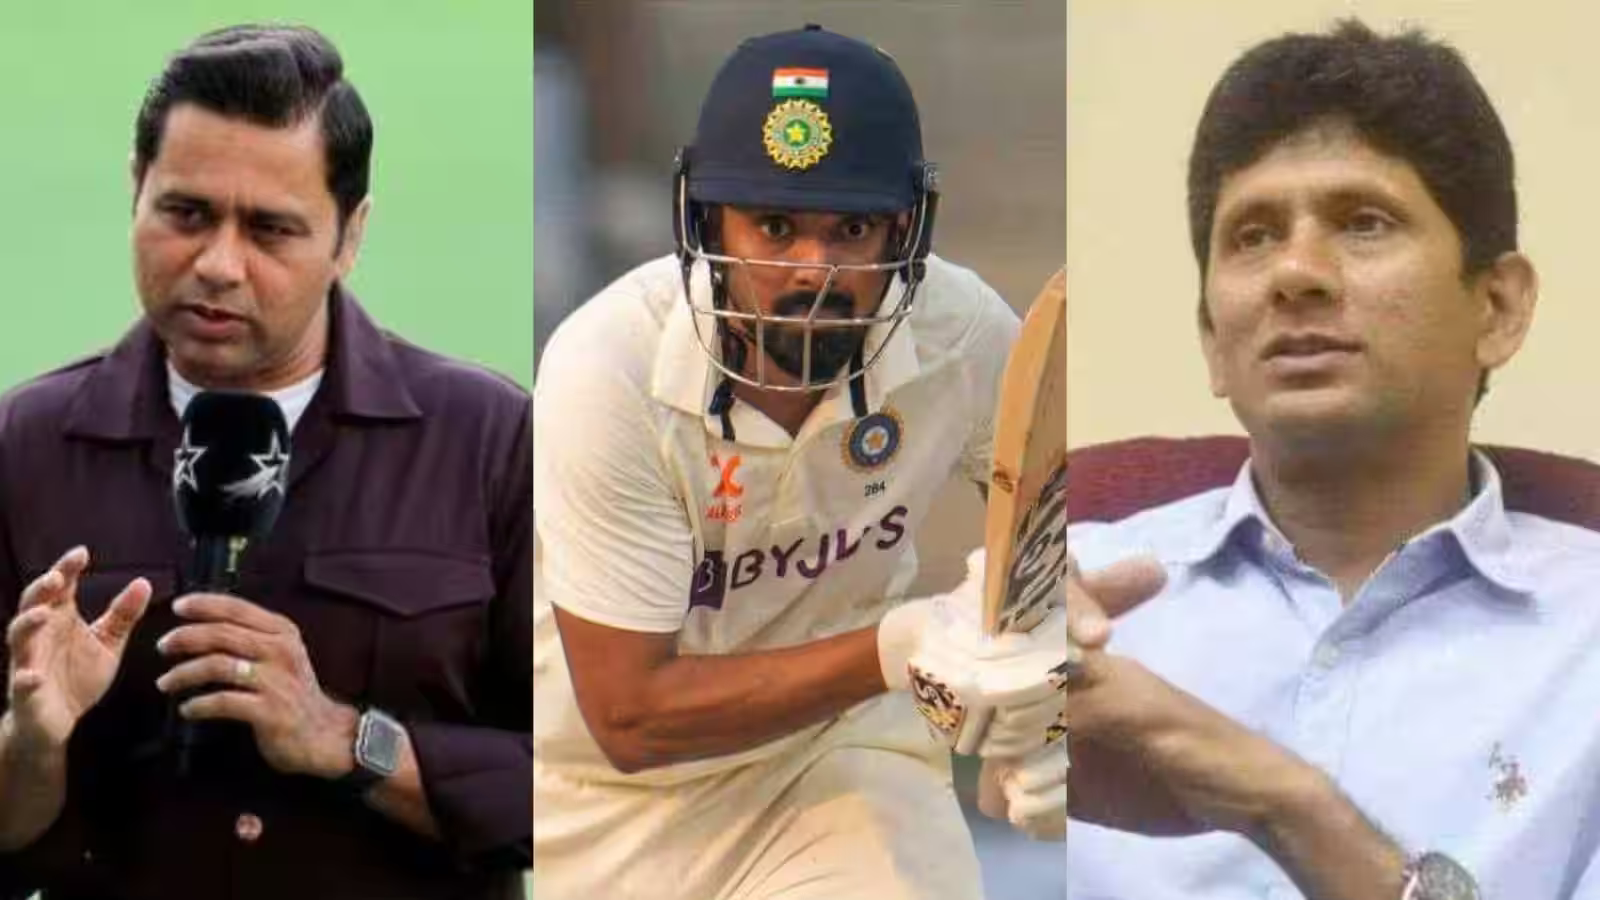 ‘Let’s not peddle any agendas’- Aakash Chopra picks apart Venkatesh Prasad’s criticism of KL Rahul with stats of his own